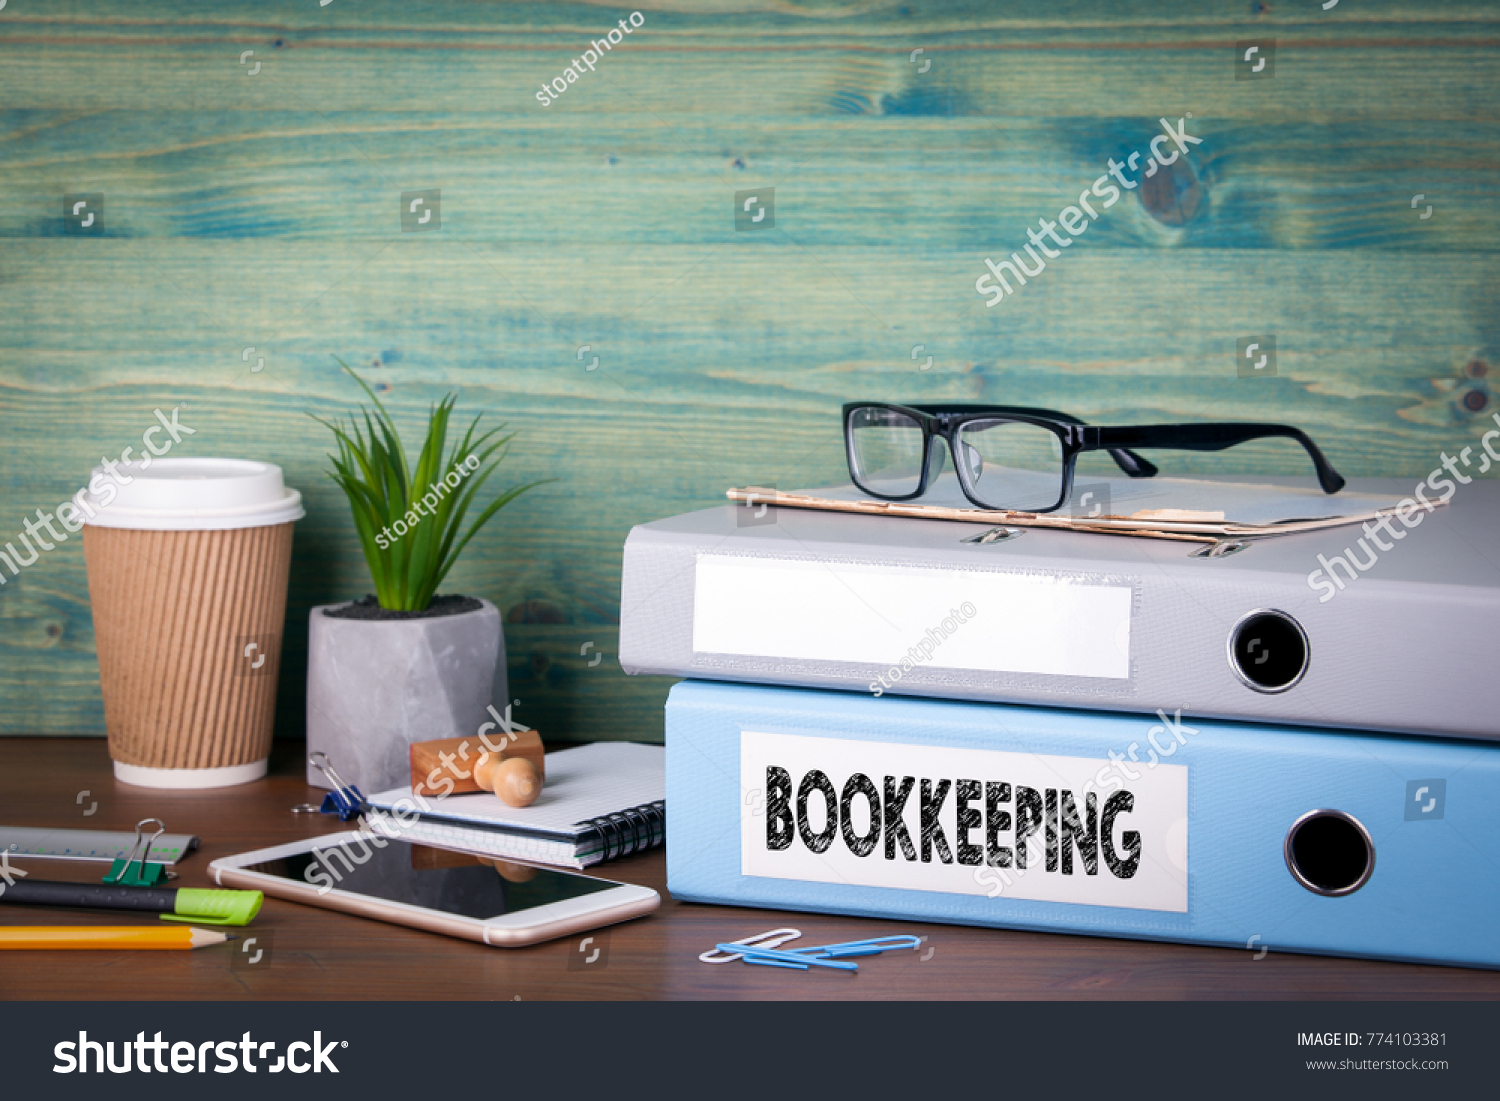 bookkeeping concept. Binders on desk in the office. Business background #774103381